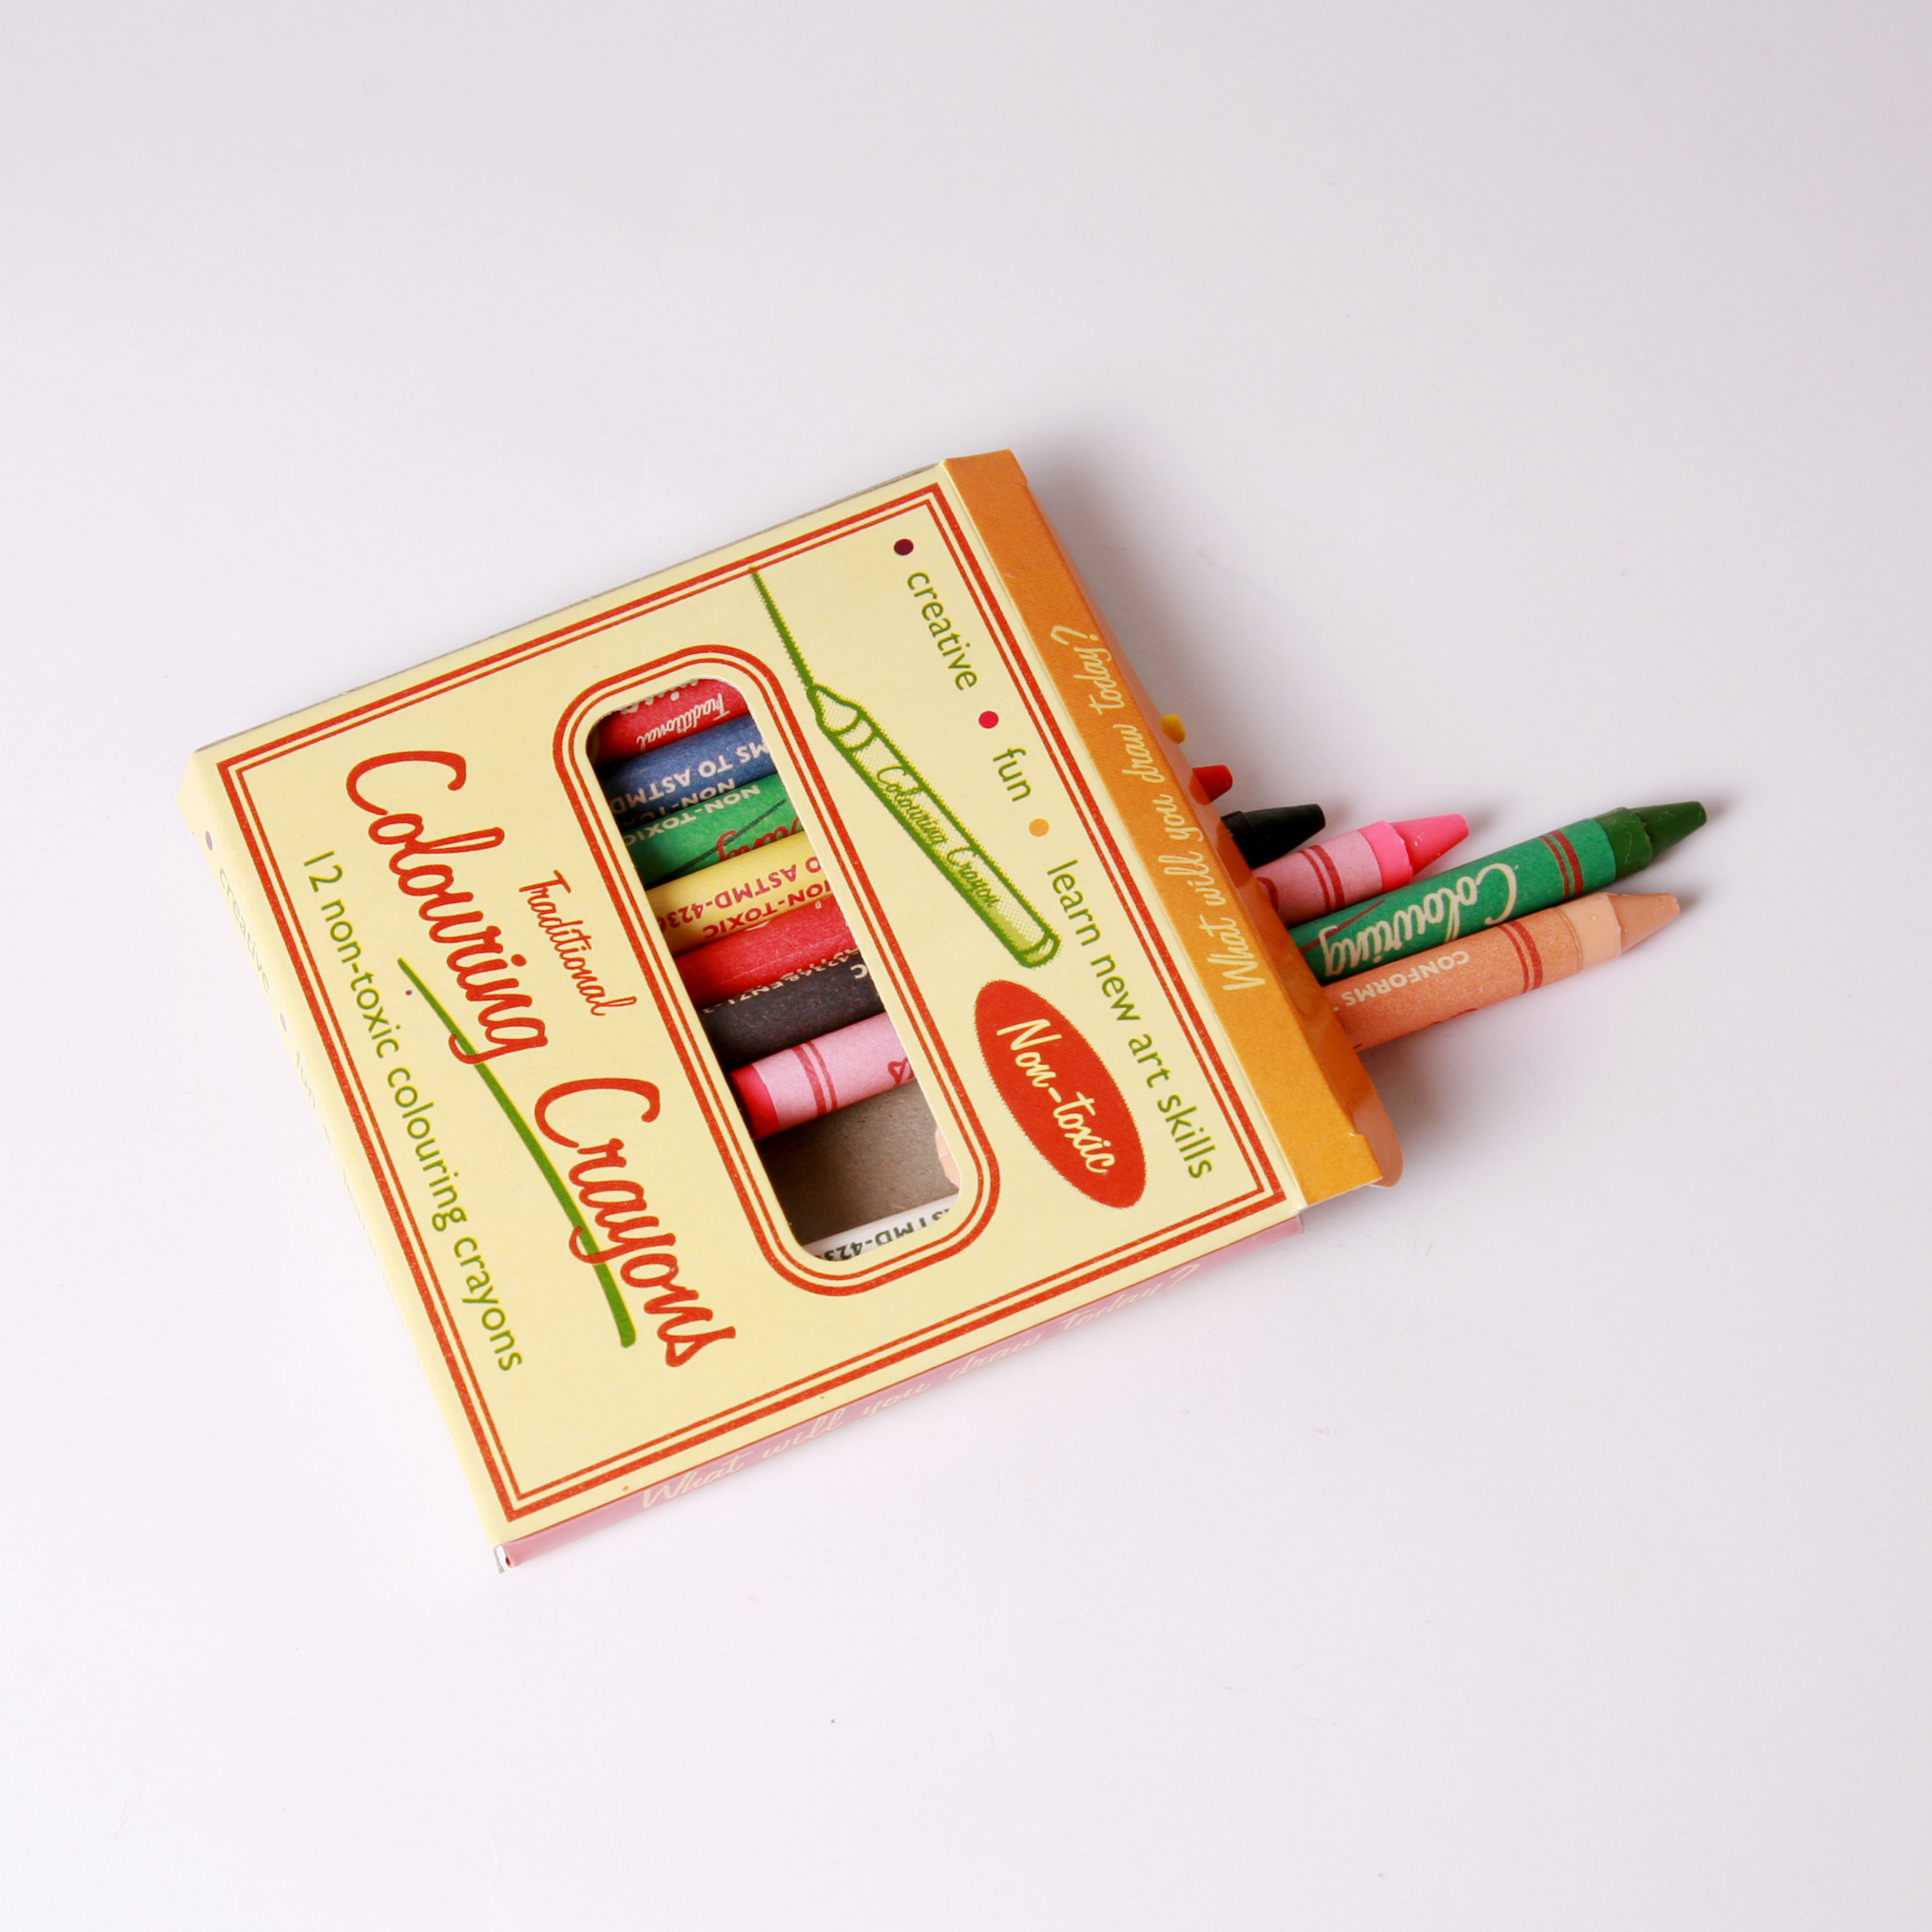 Traditional colouring crayons